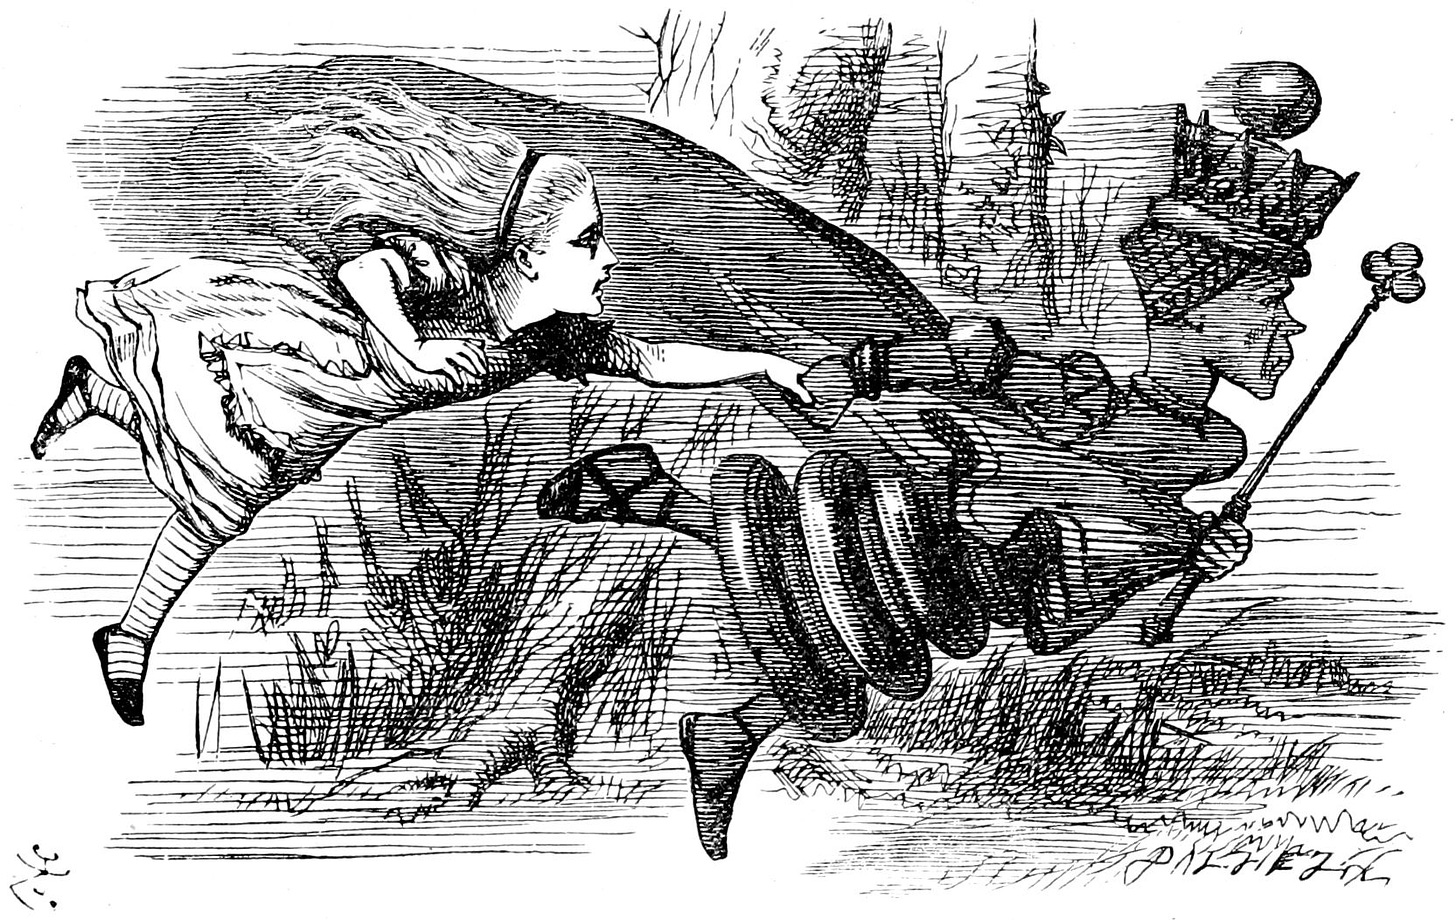 «Now! Now!» cried the Queen. «Faster! Faster!» Sir John Tenniel